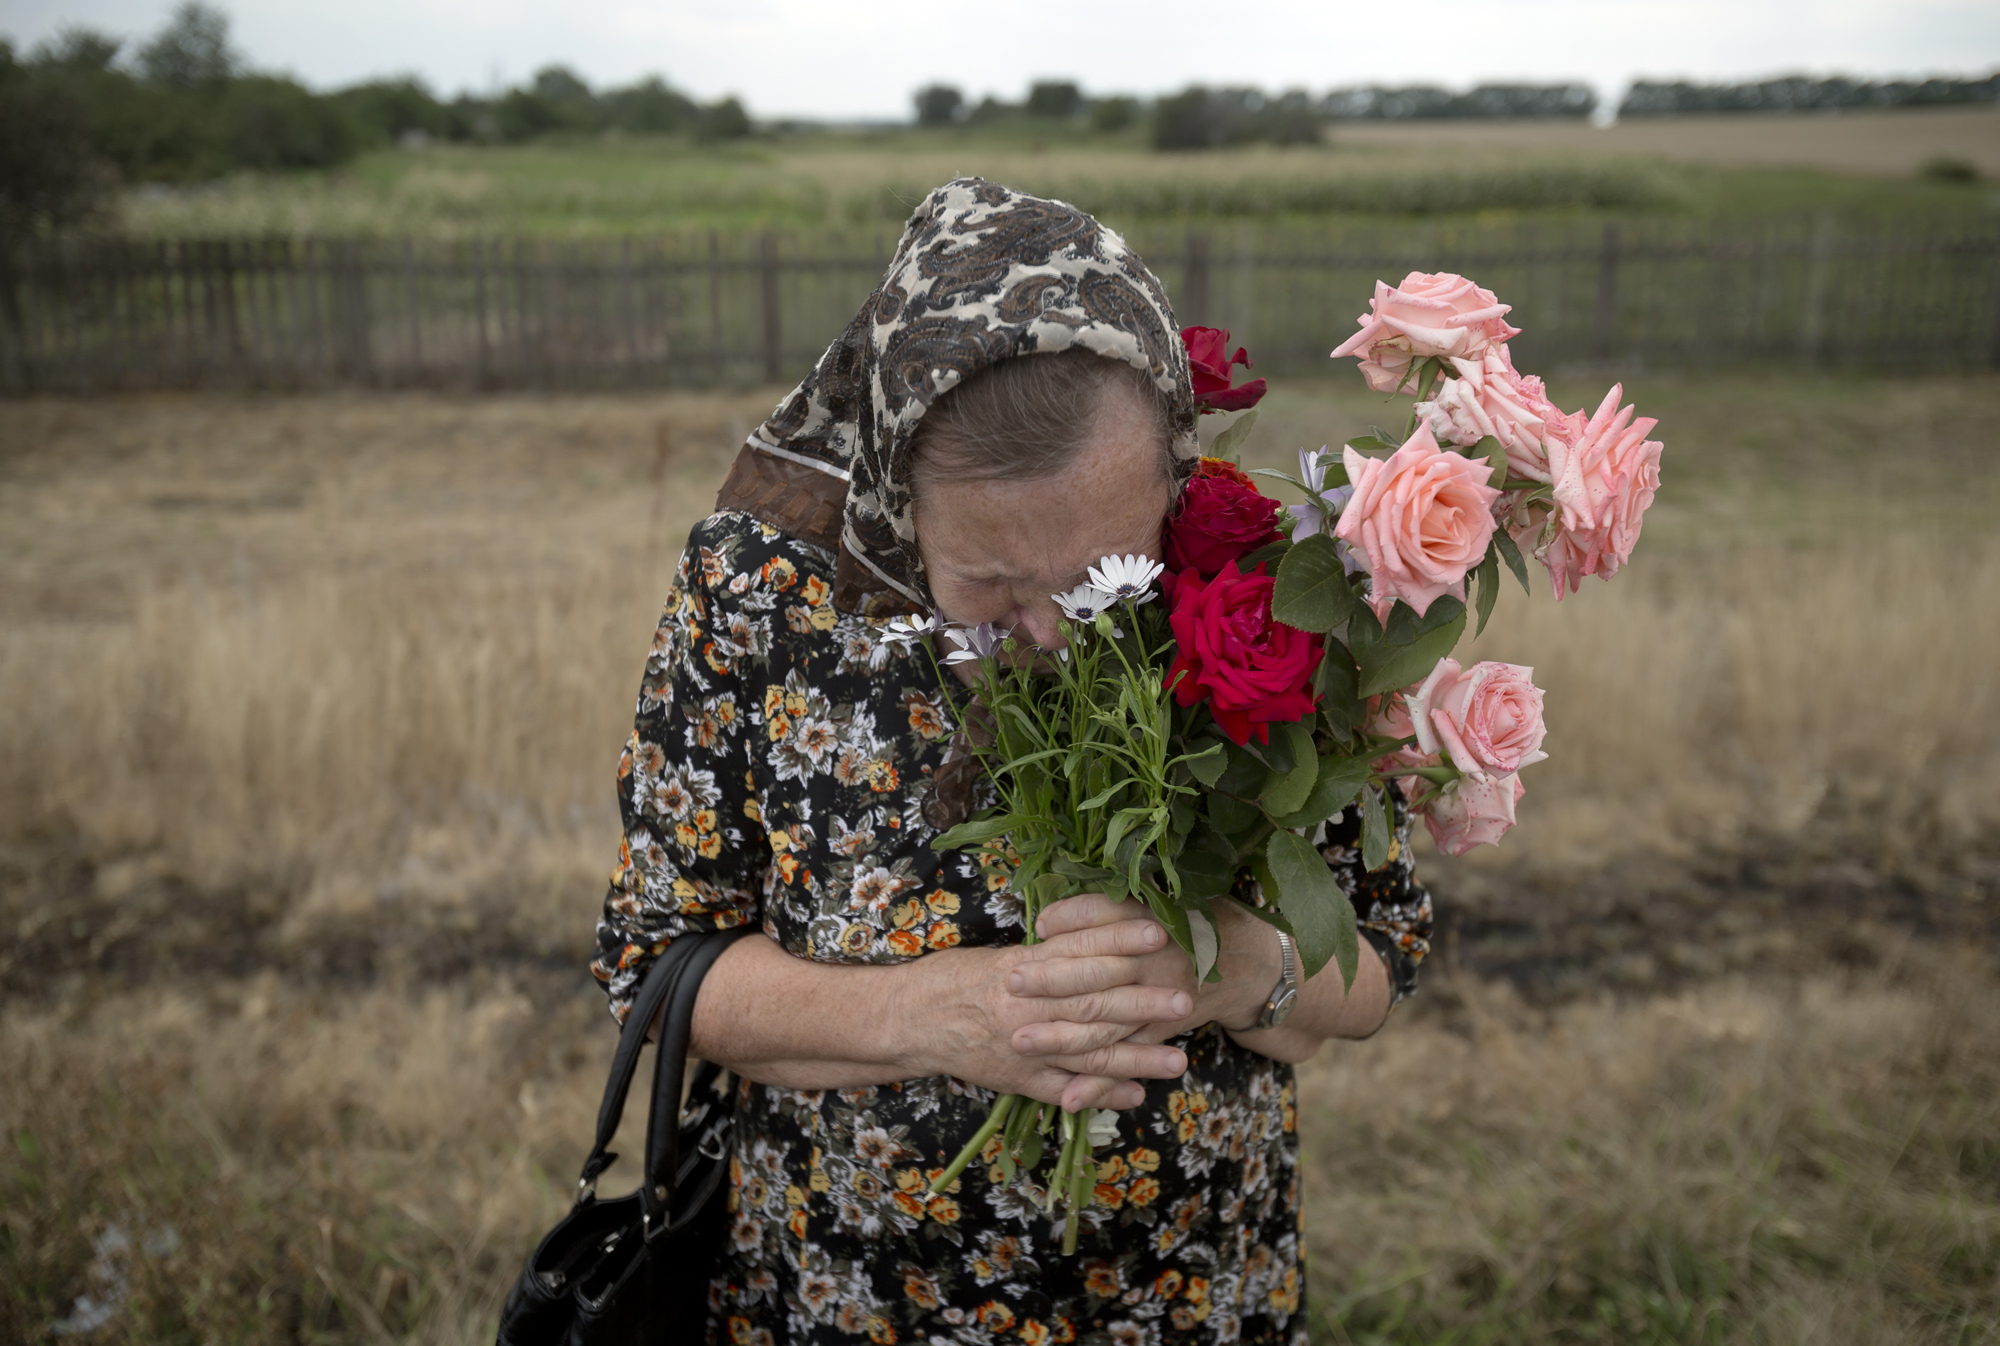 A woman cries during a religious service held by villagers in memory of the victims at the crash site of Malaysia Airlines Flight 17, near the village of Hrabove, eastern Ukraine, July 22, 2014.